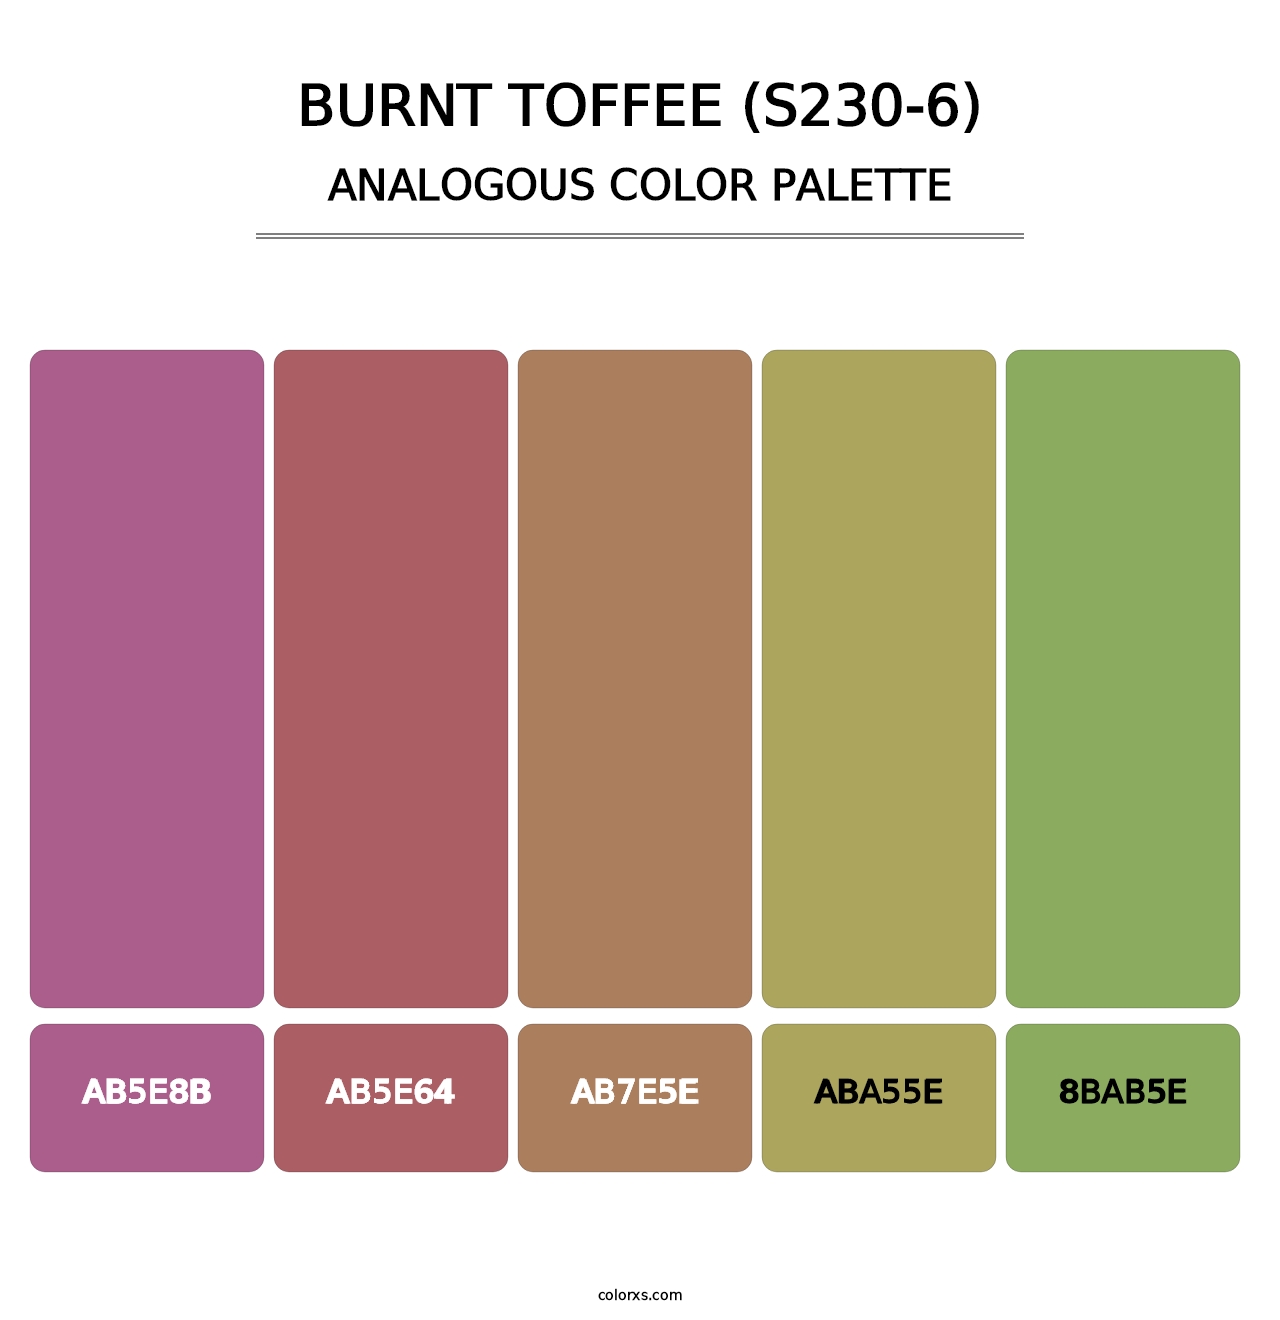 Burnt Toffee (S230-6) - Analogous Color Palette